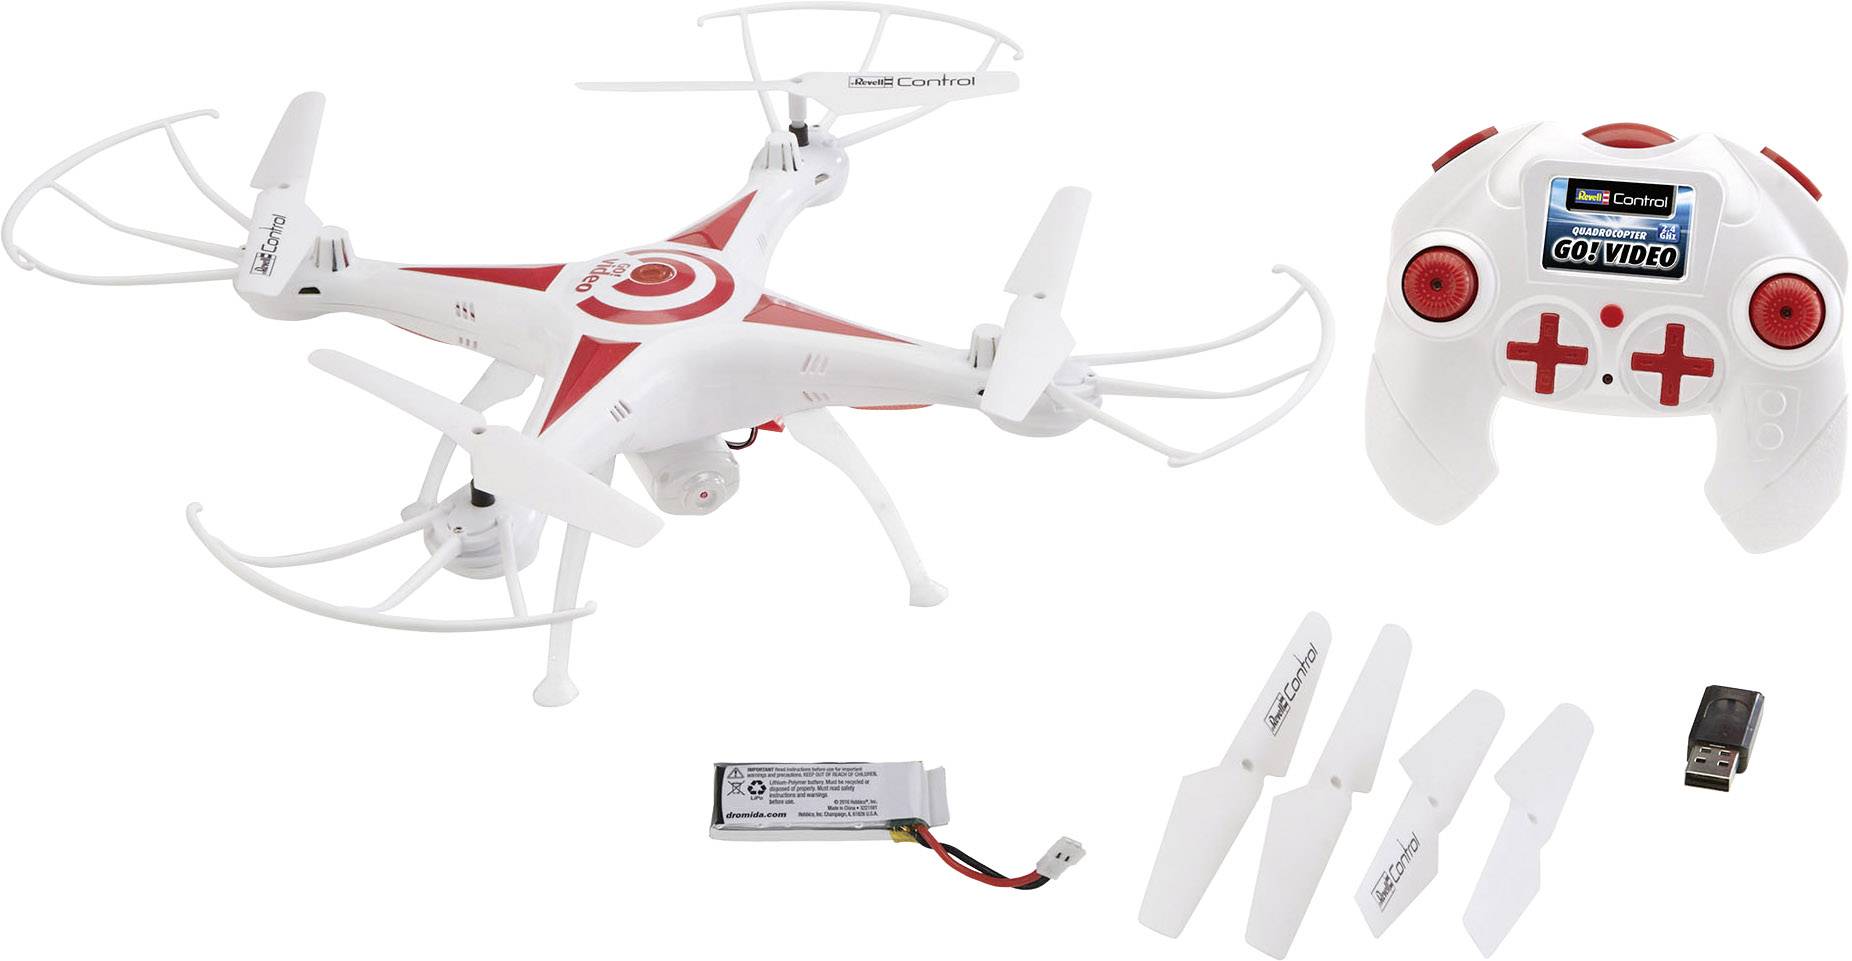 Revell 23878 Quadcopter "FUNTIC 2.0" 